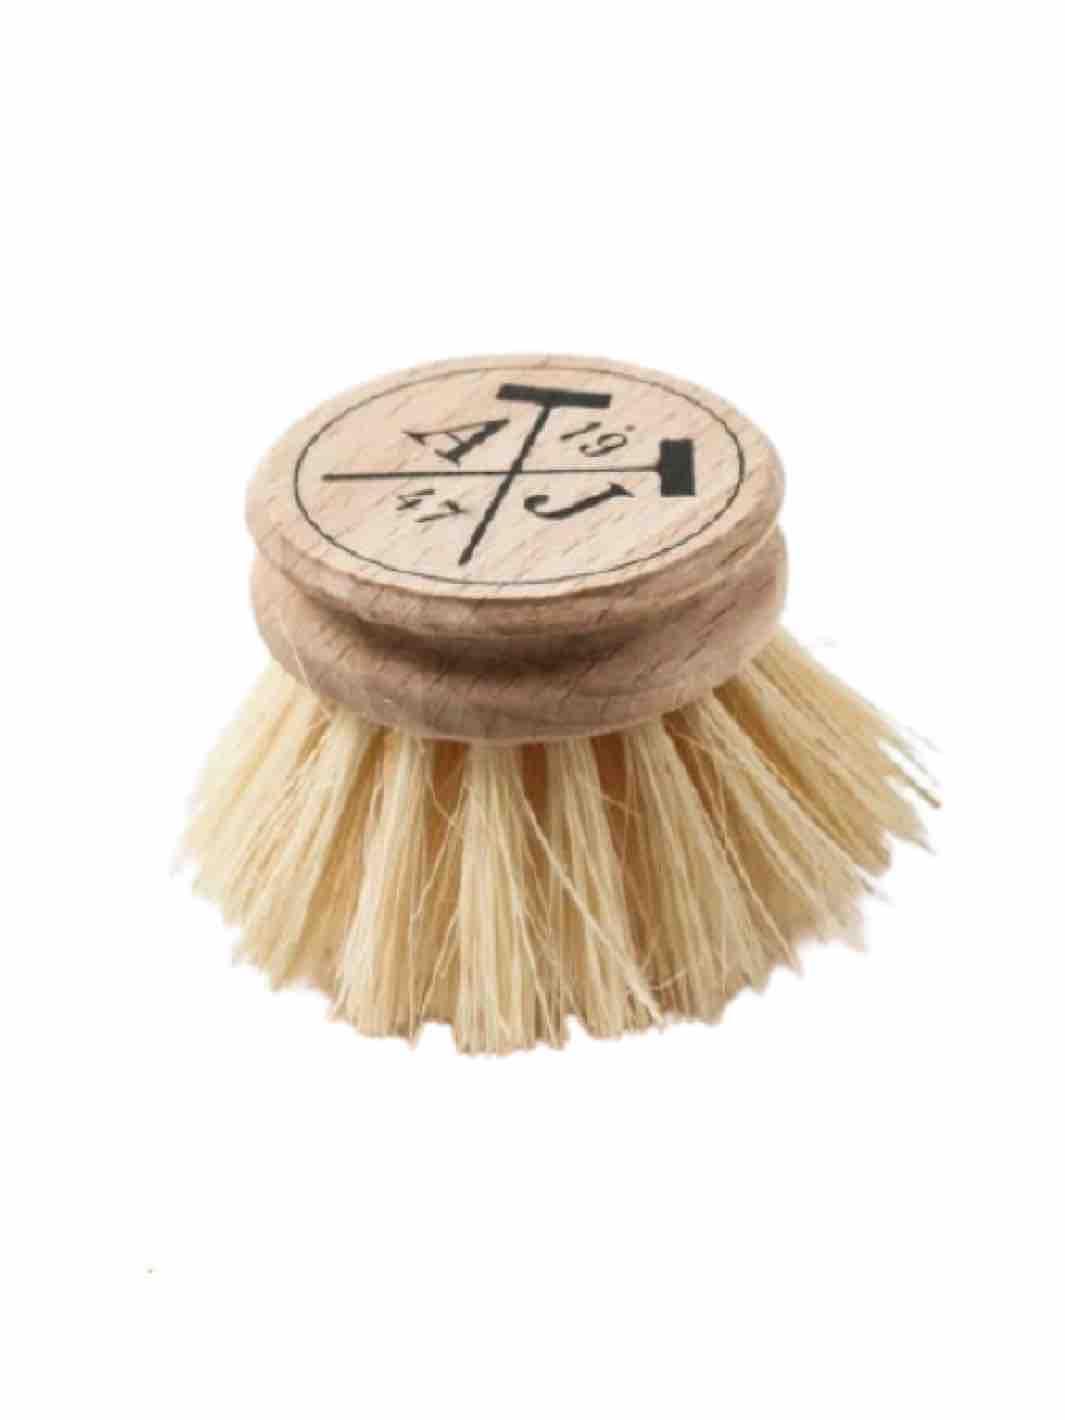 Natural Tampico & Wood Handle Small Scrub Brush with Square Ends